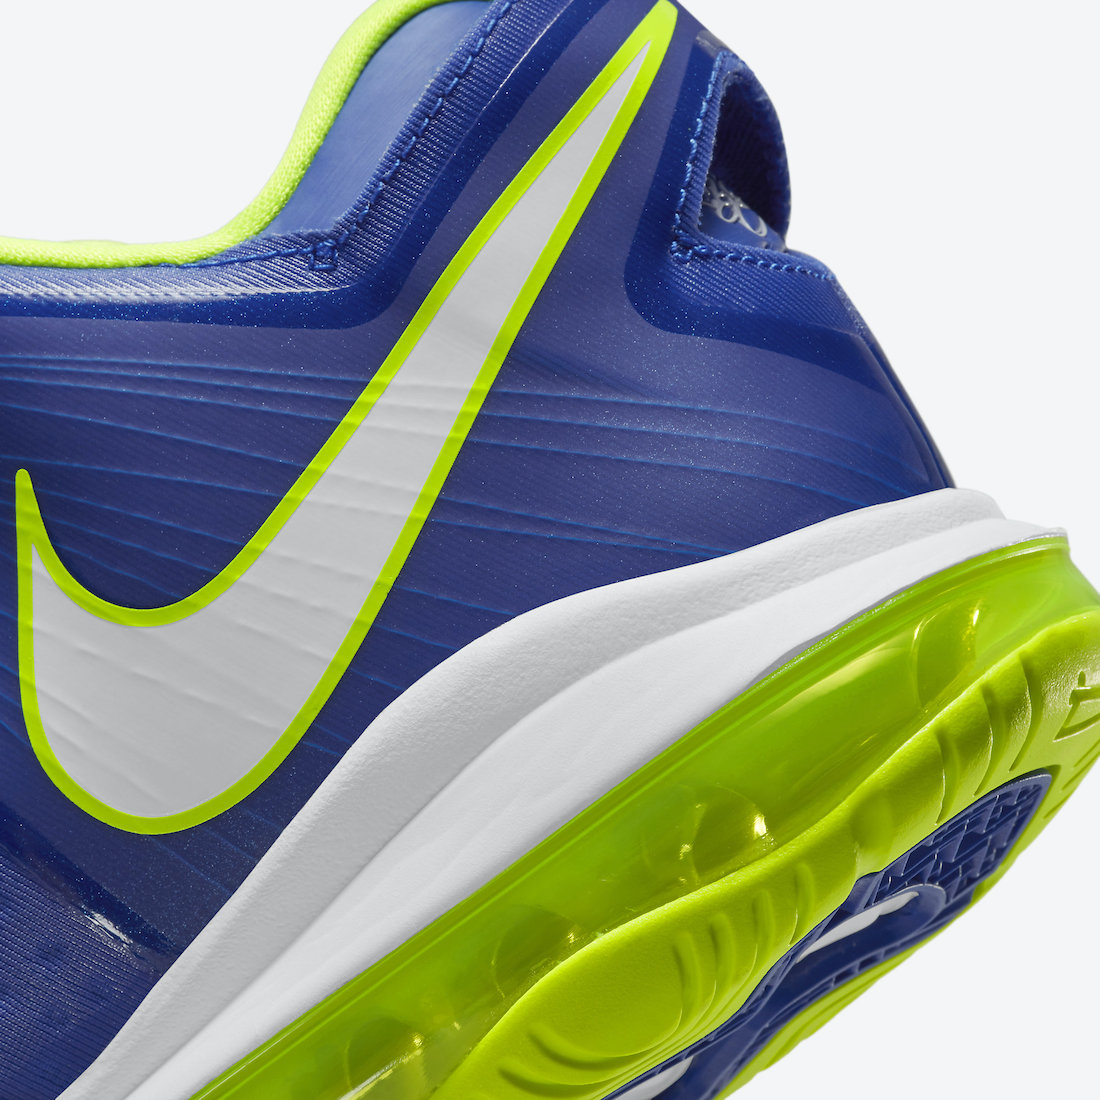 Nike-LeBron-8-V2-Low-Sprite-2021-DN1581-400-Release-Date-7